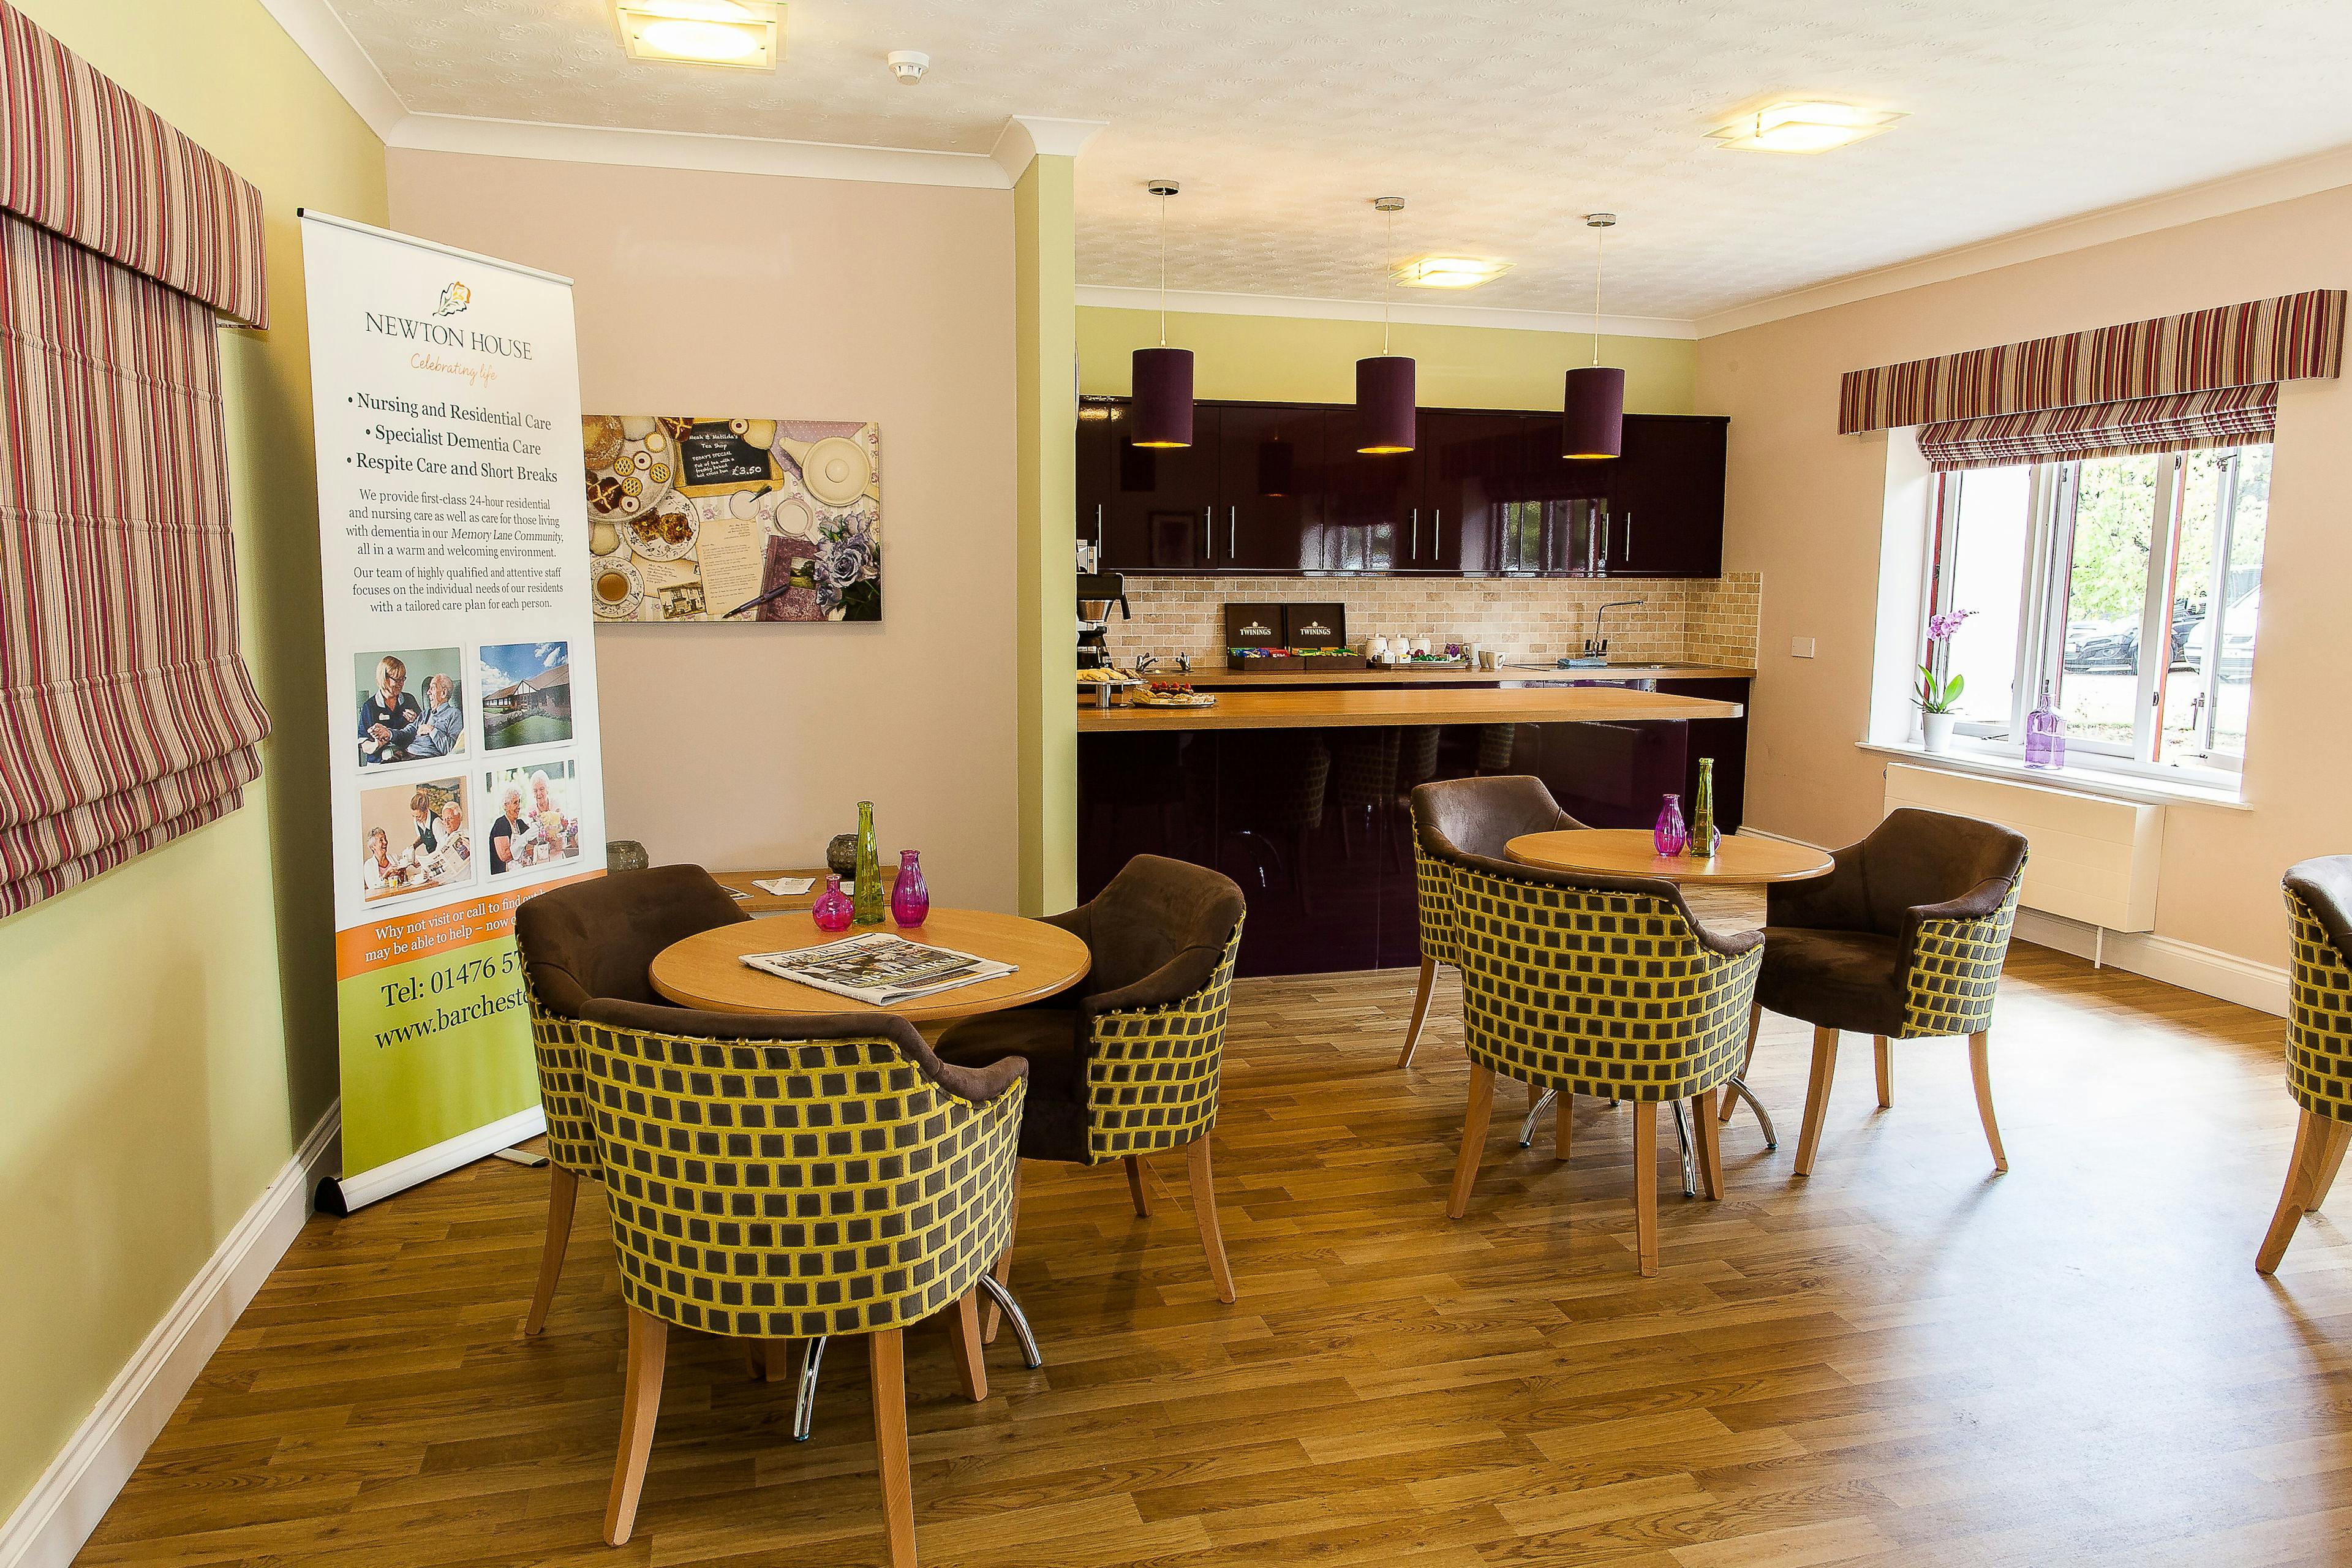 Cafe Area of Newton House Care Home in Grantham, South Kesteven